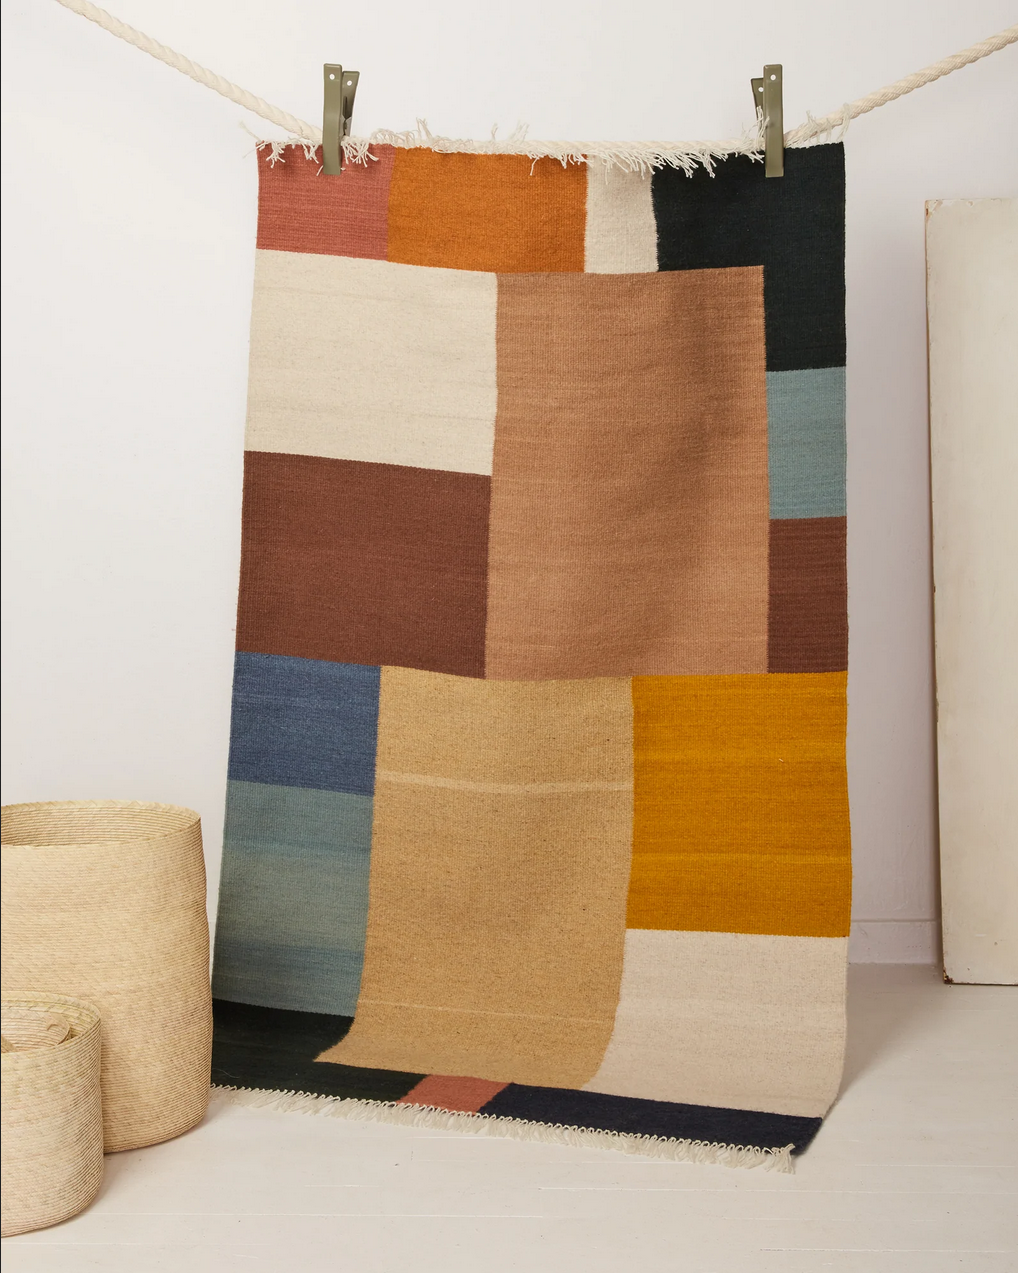 Patterned area rug in orange, brown, blue, beige with fringe; suspeced from clothesline in a white room